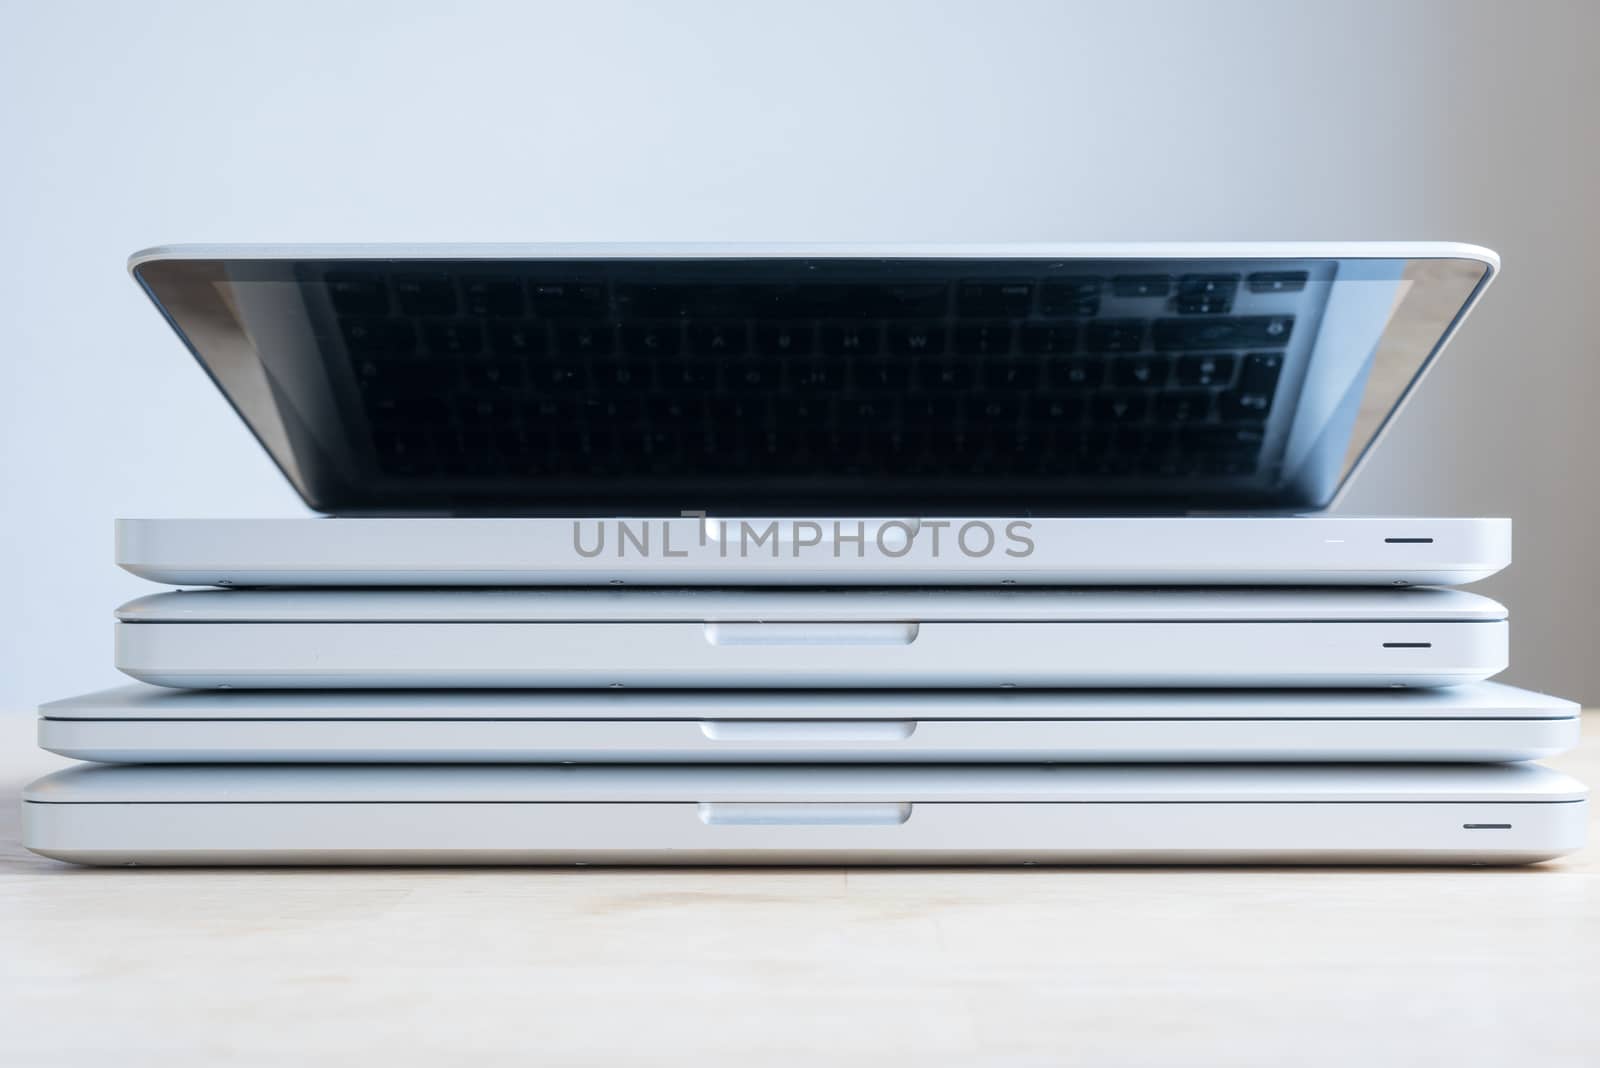 A bunch of aluminium laptops stacked on top of each other. The one on top is open.